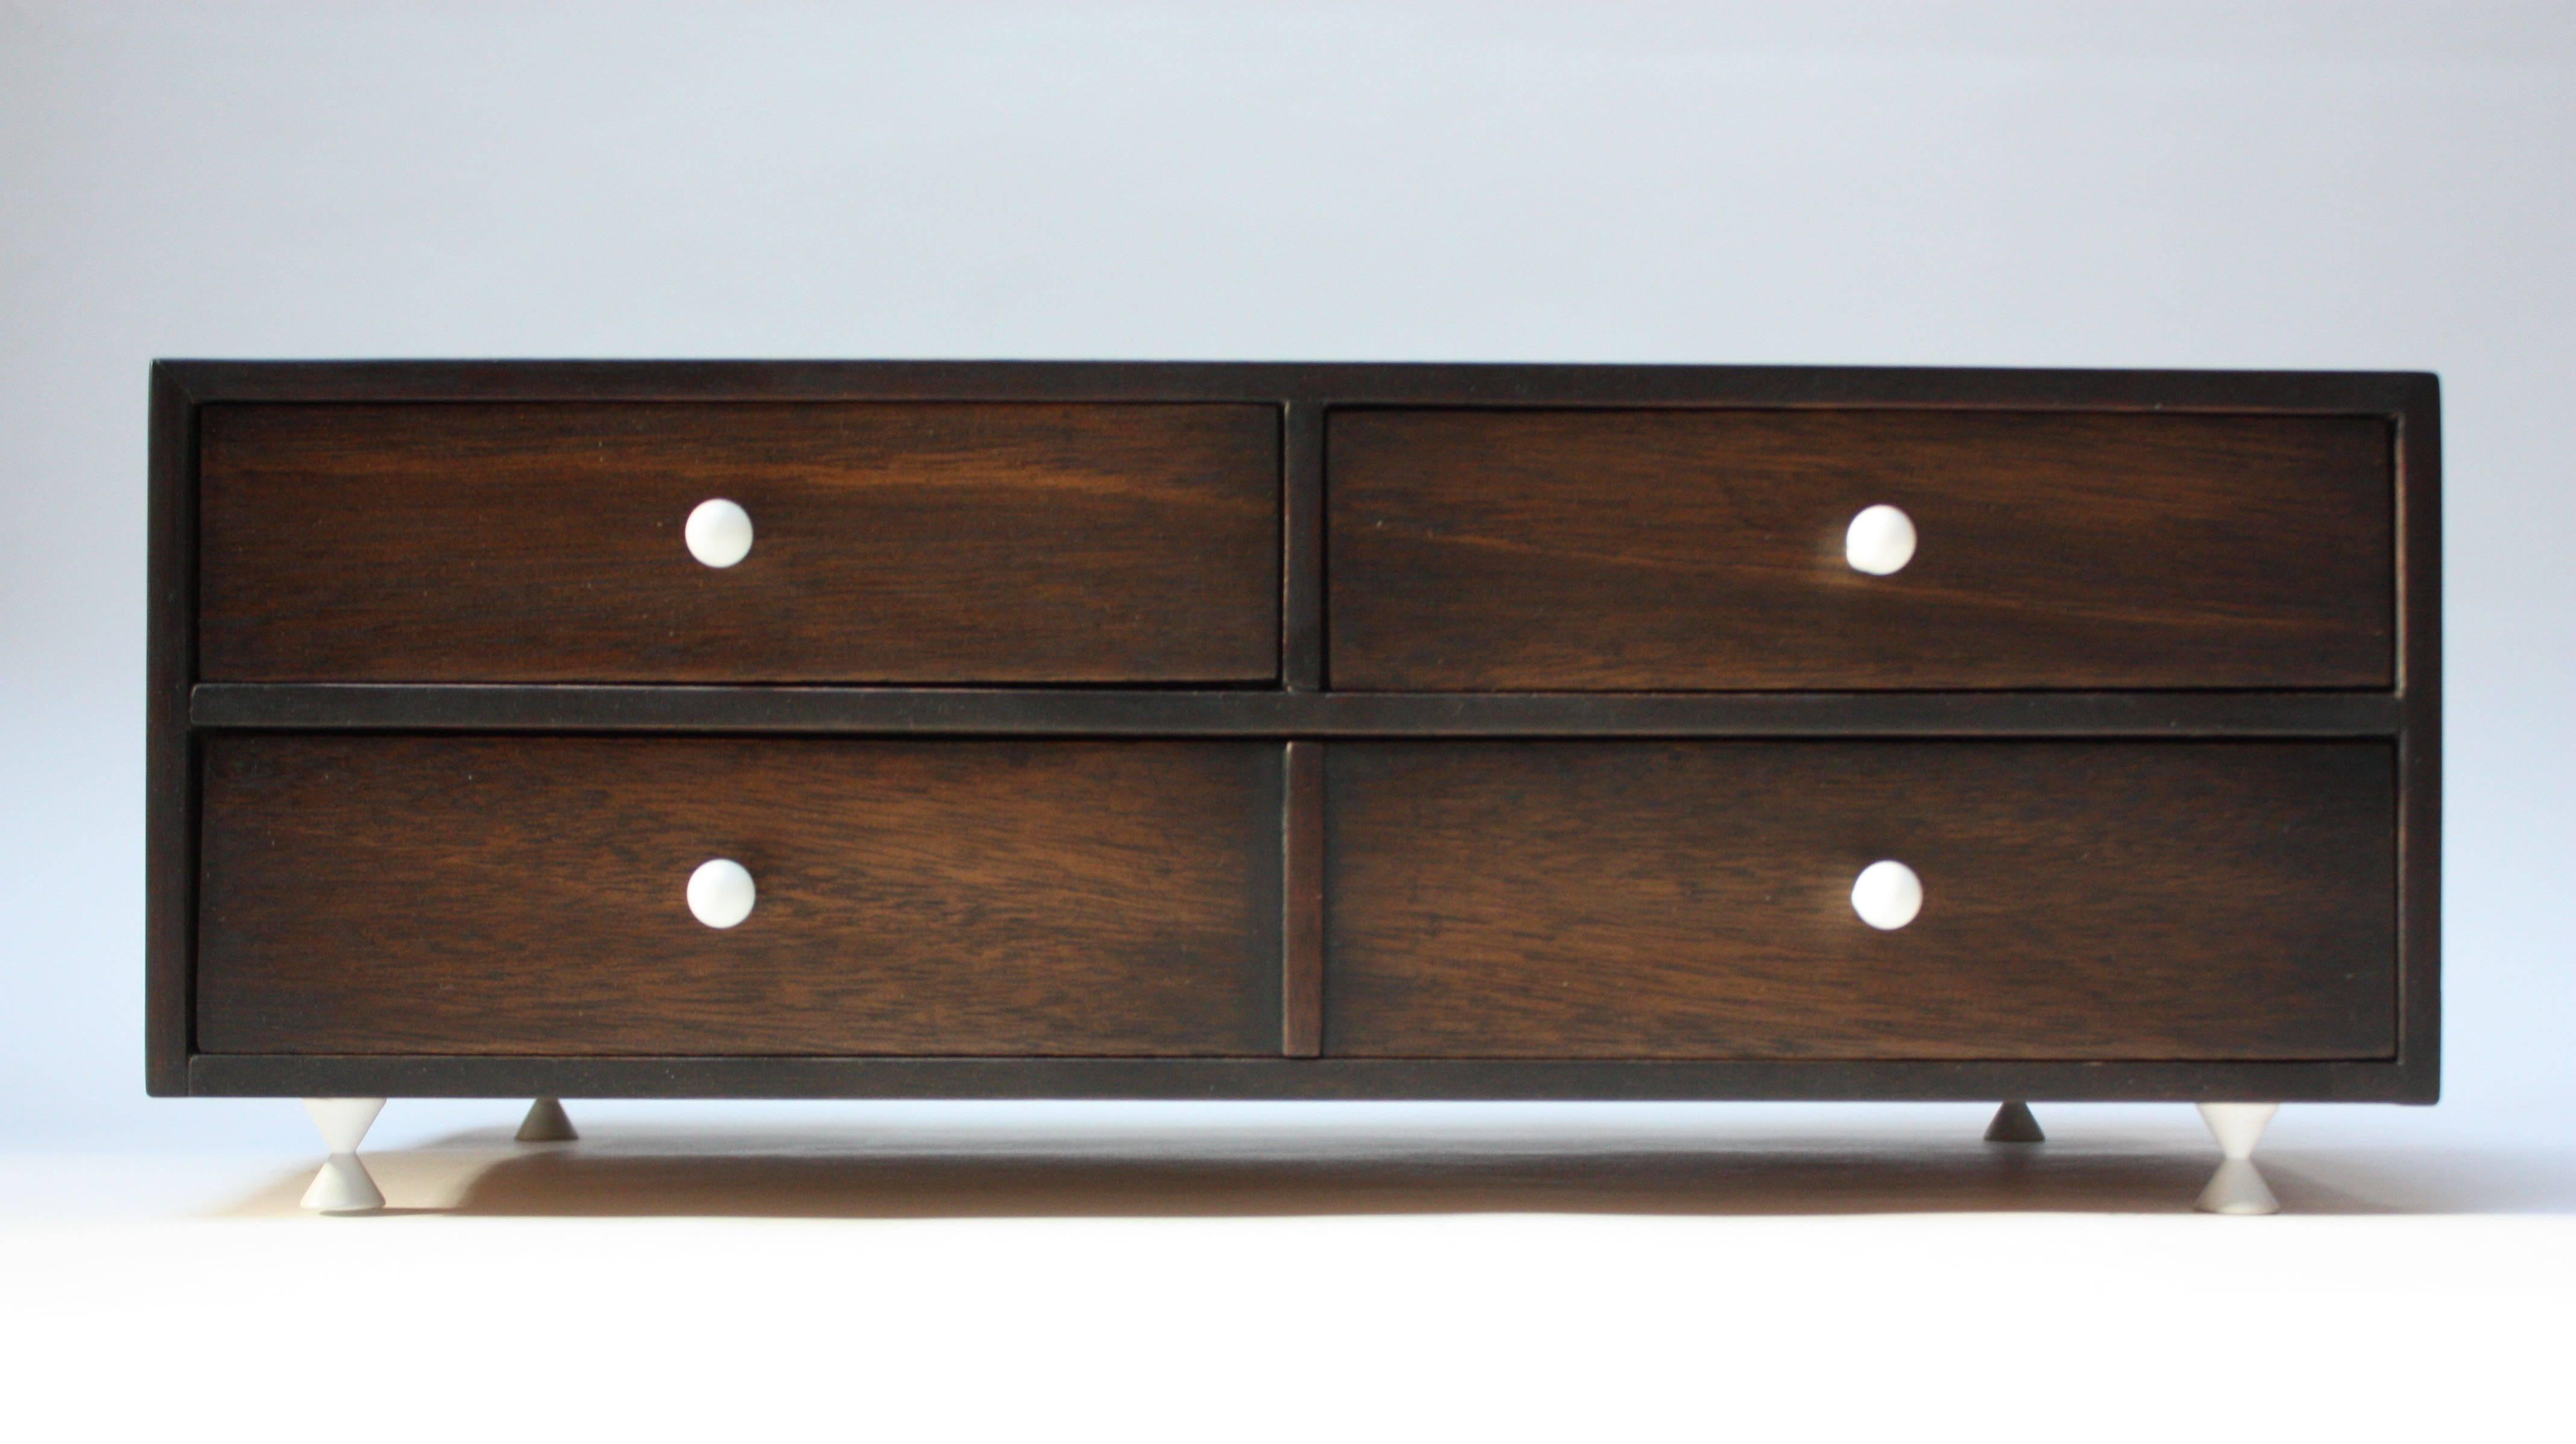 Originally designed in the 1950s by American of Martinsville as the smaller 'chest-on-chest' component to sit atop the corresponding sideboard, this piece can be used to hold smaller linens, napkin rings, and silverware. However, its more practical,